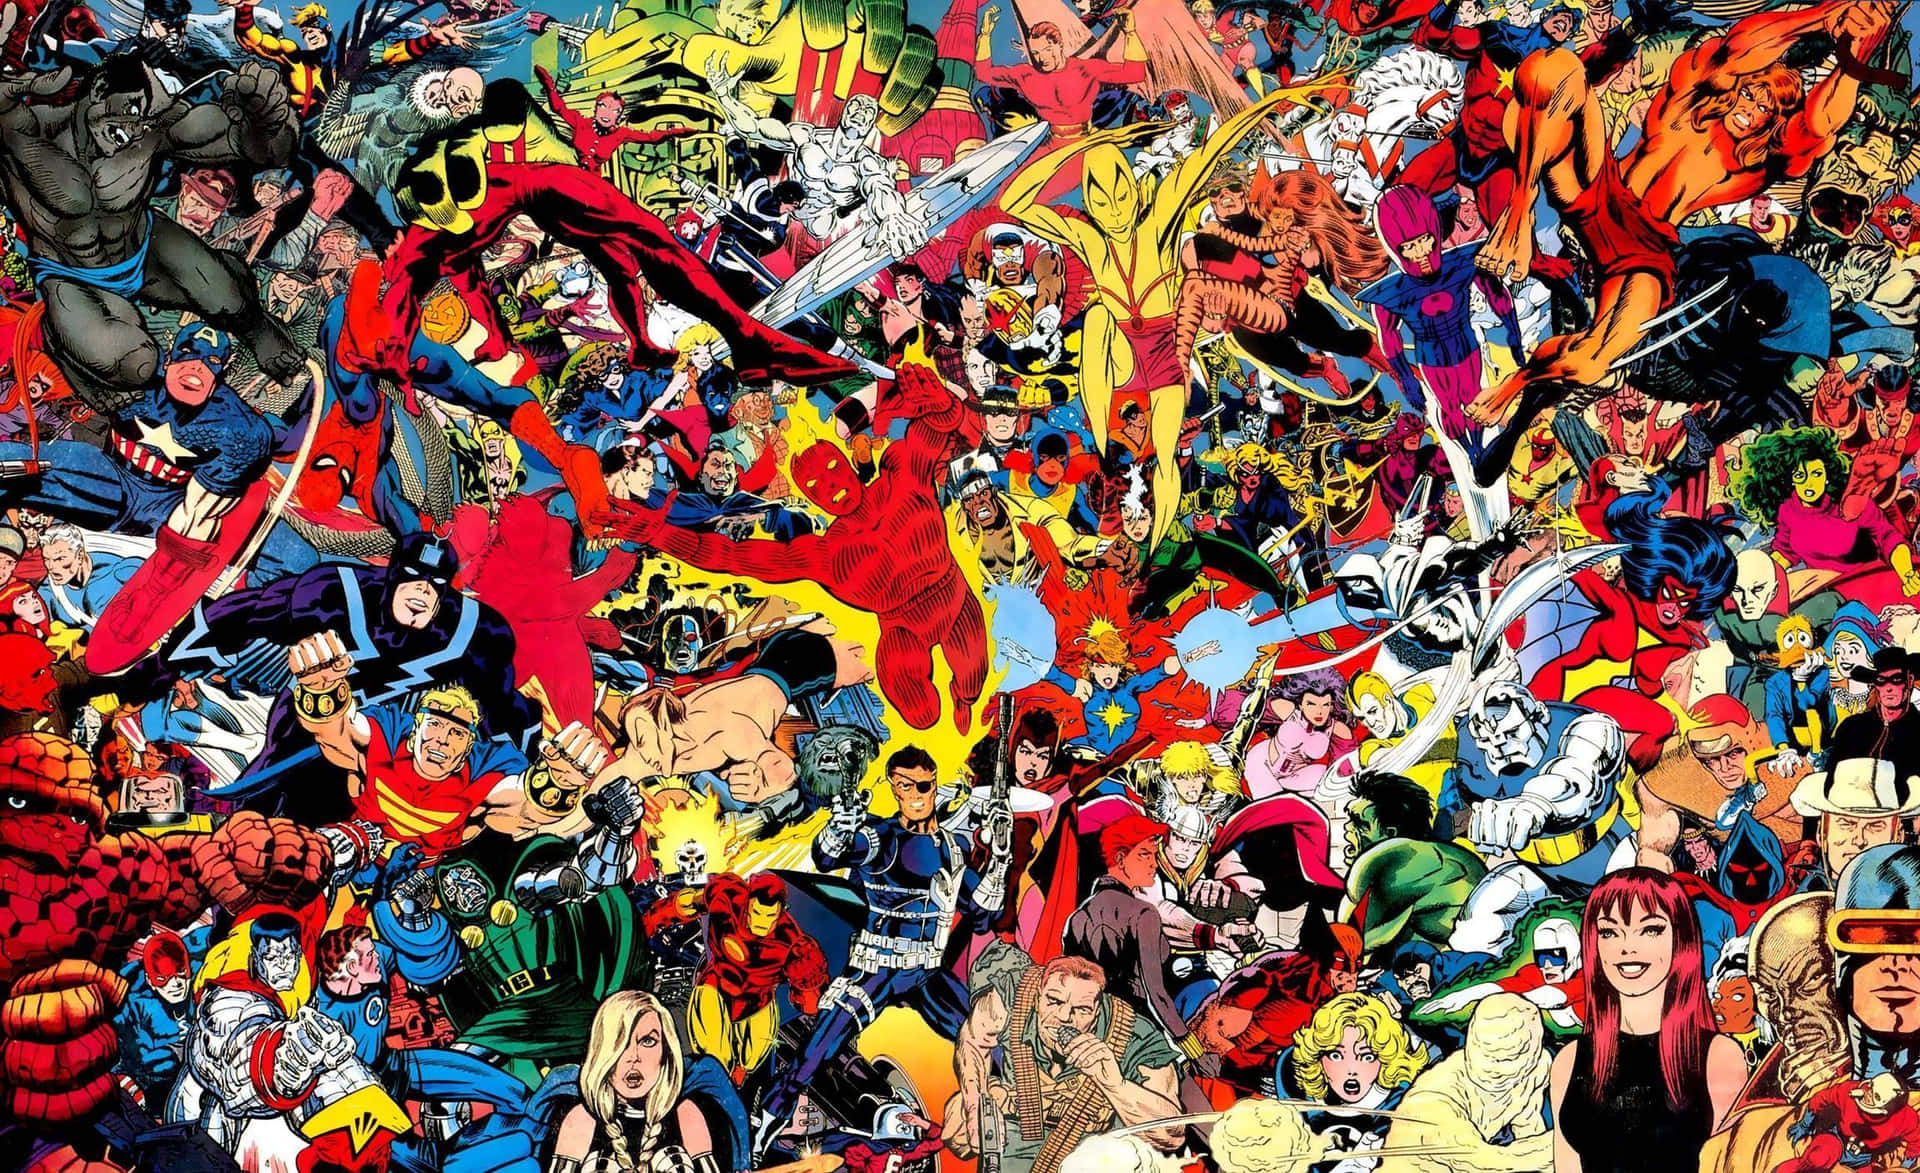 All your favorite cartoon characters in one image!" Wallpaper